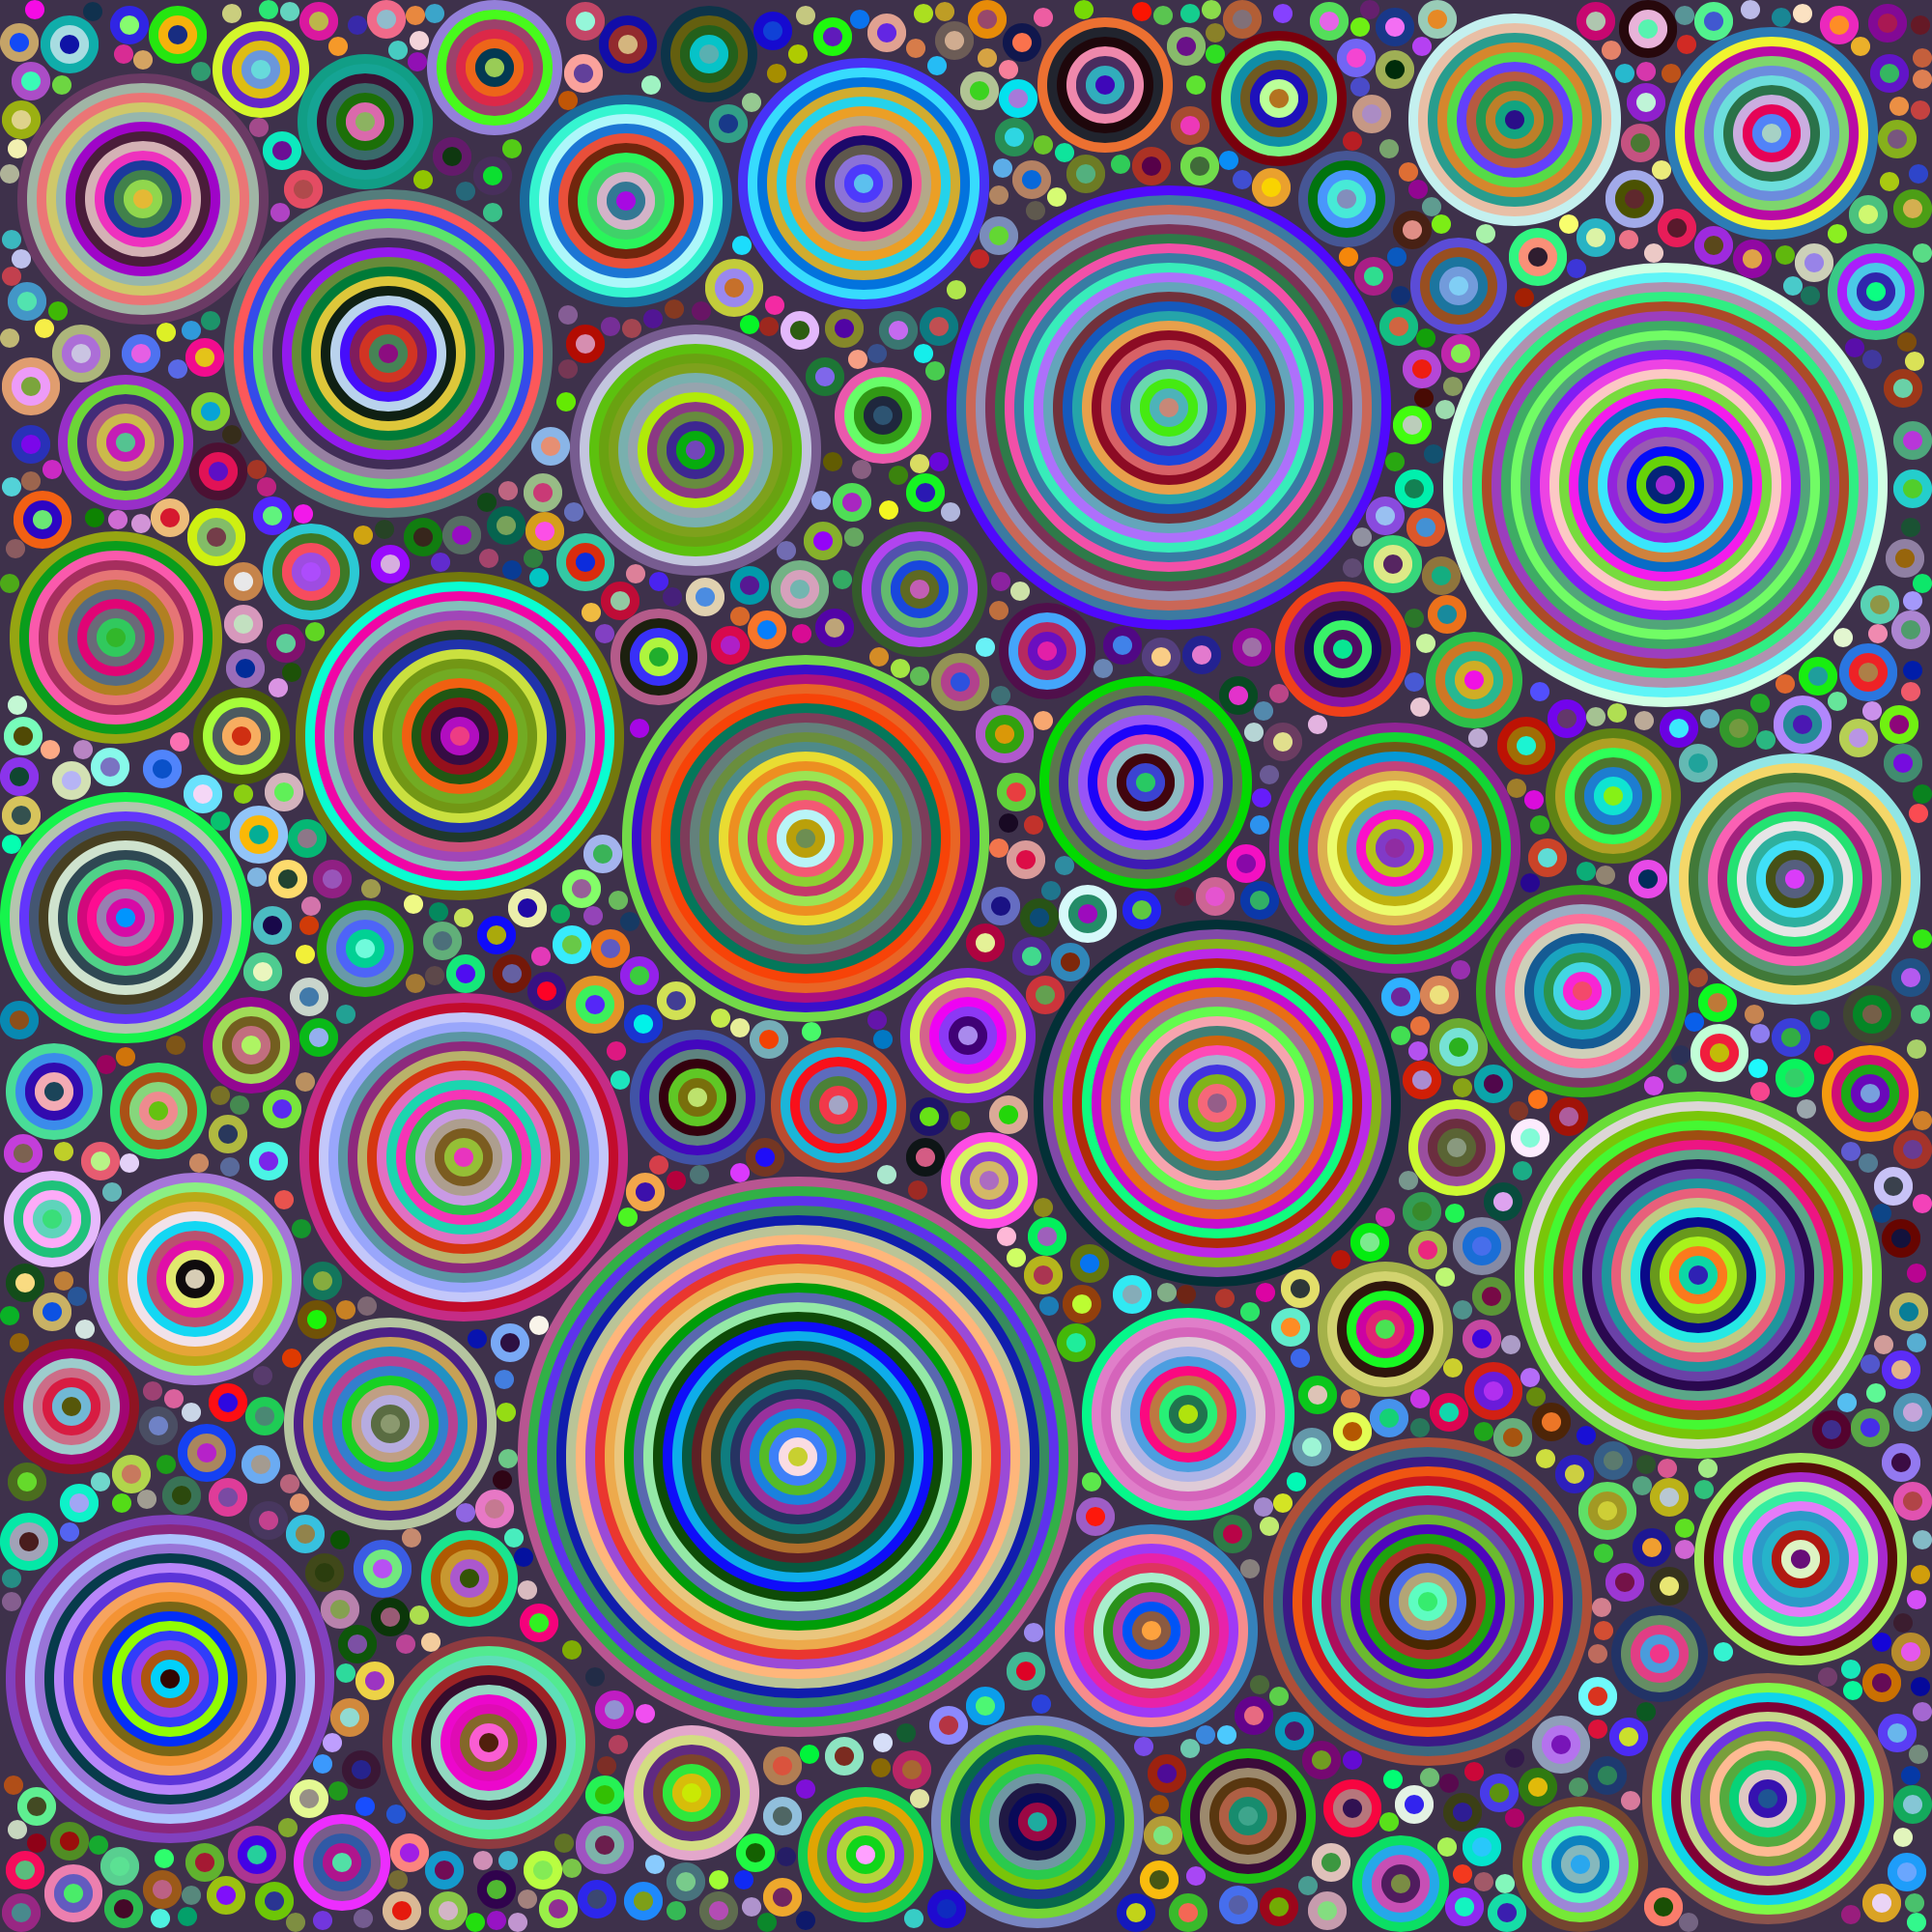 Groups of concentric circles of various sizes and random colors fill a square image.